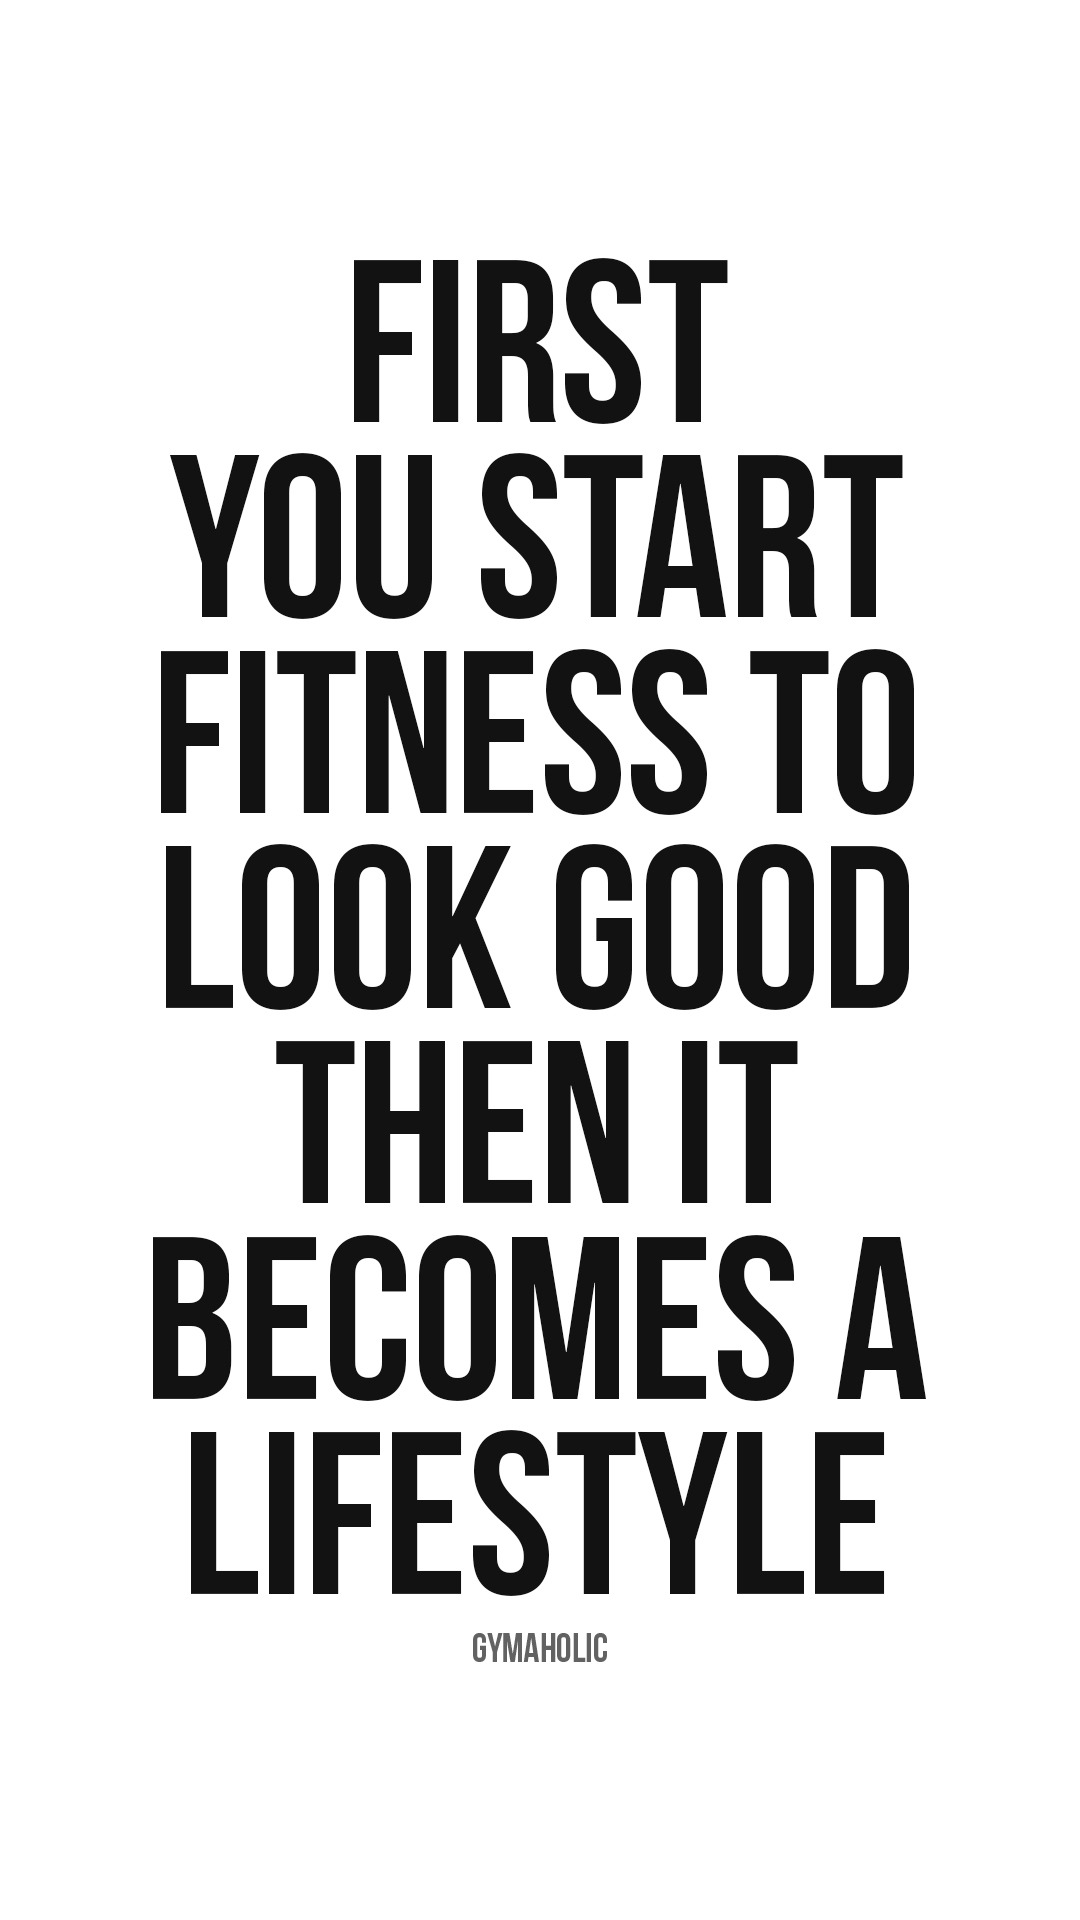 First you start fitness to look good, then it becomes a lifestyle